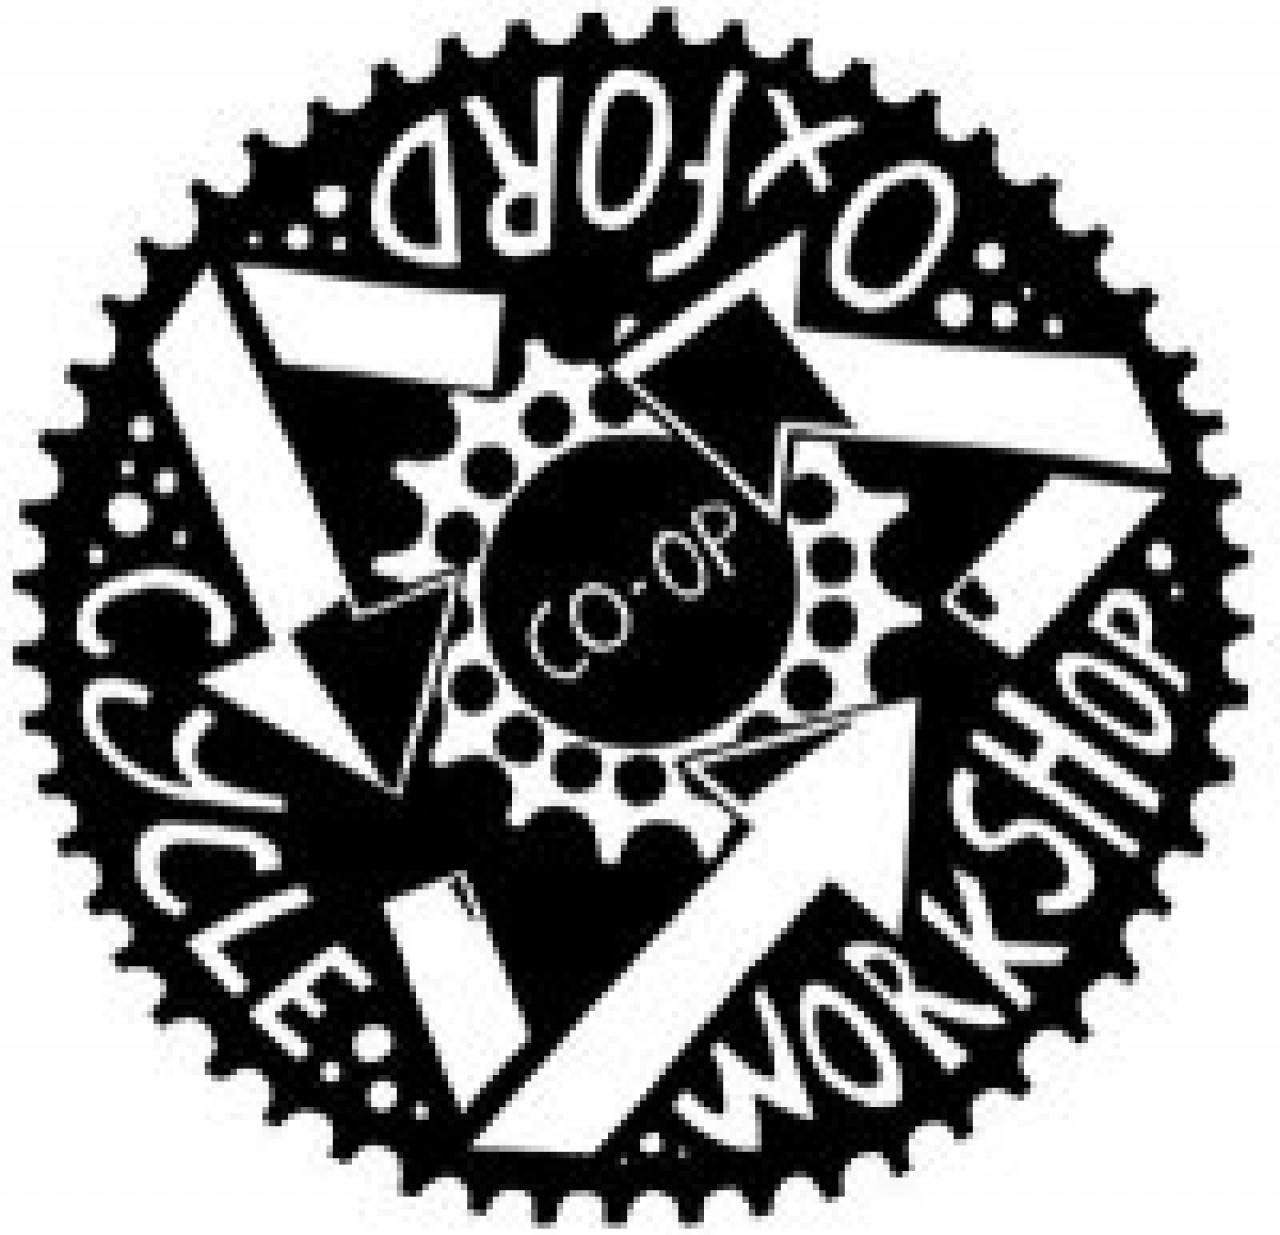 Oxford Cycle Workshop shuts up shop to focus on outreach